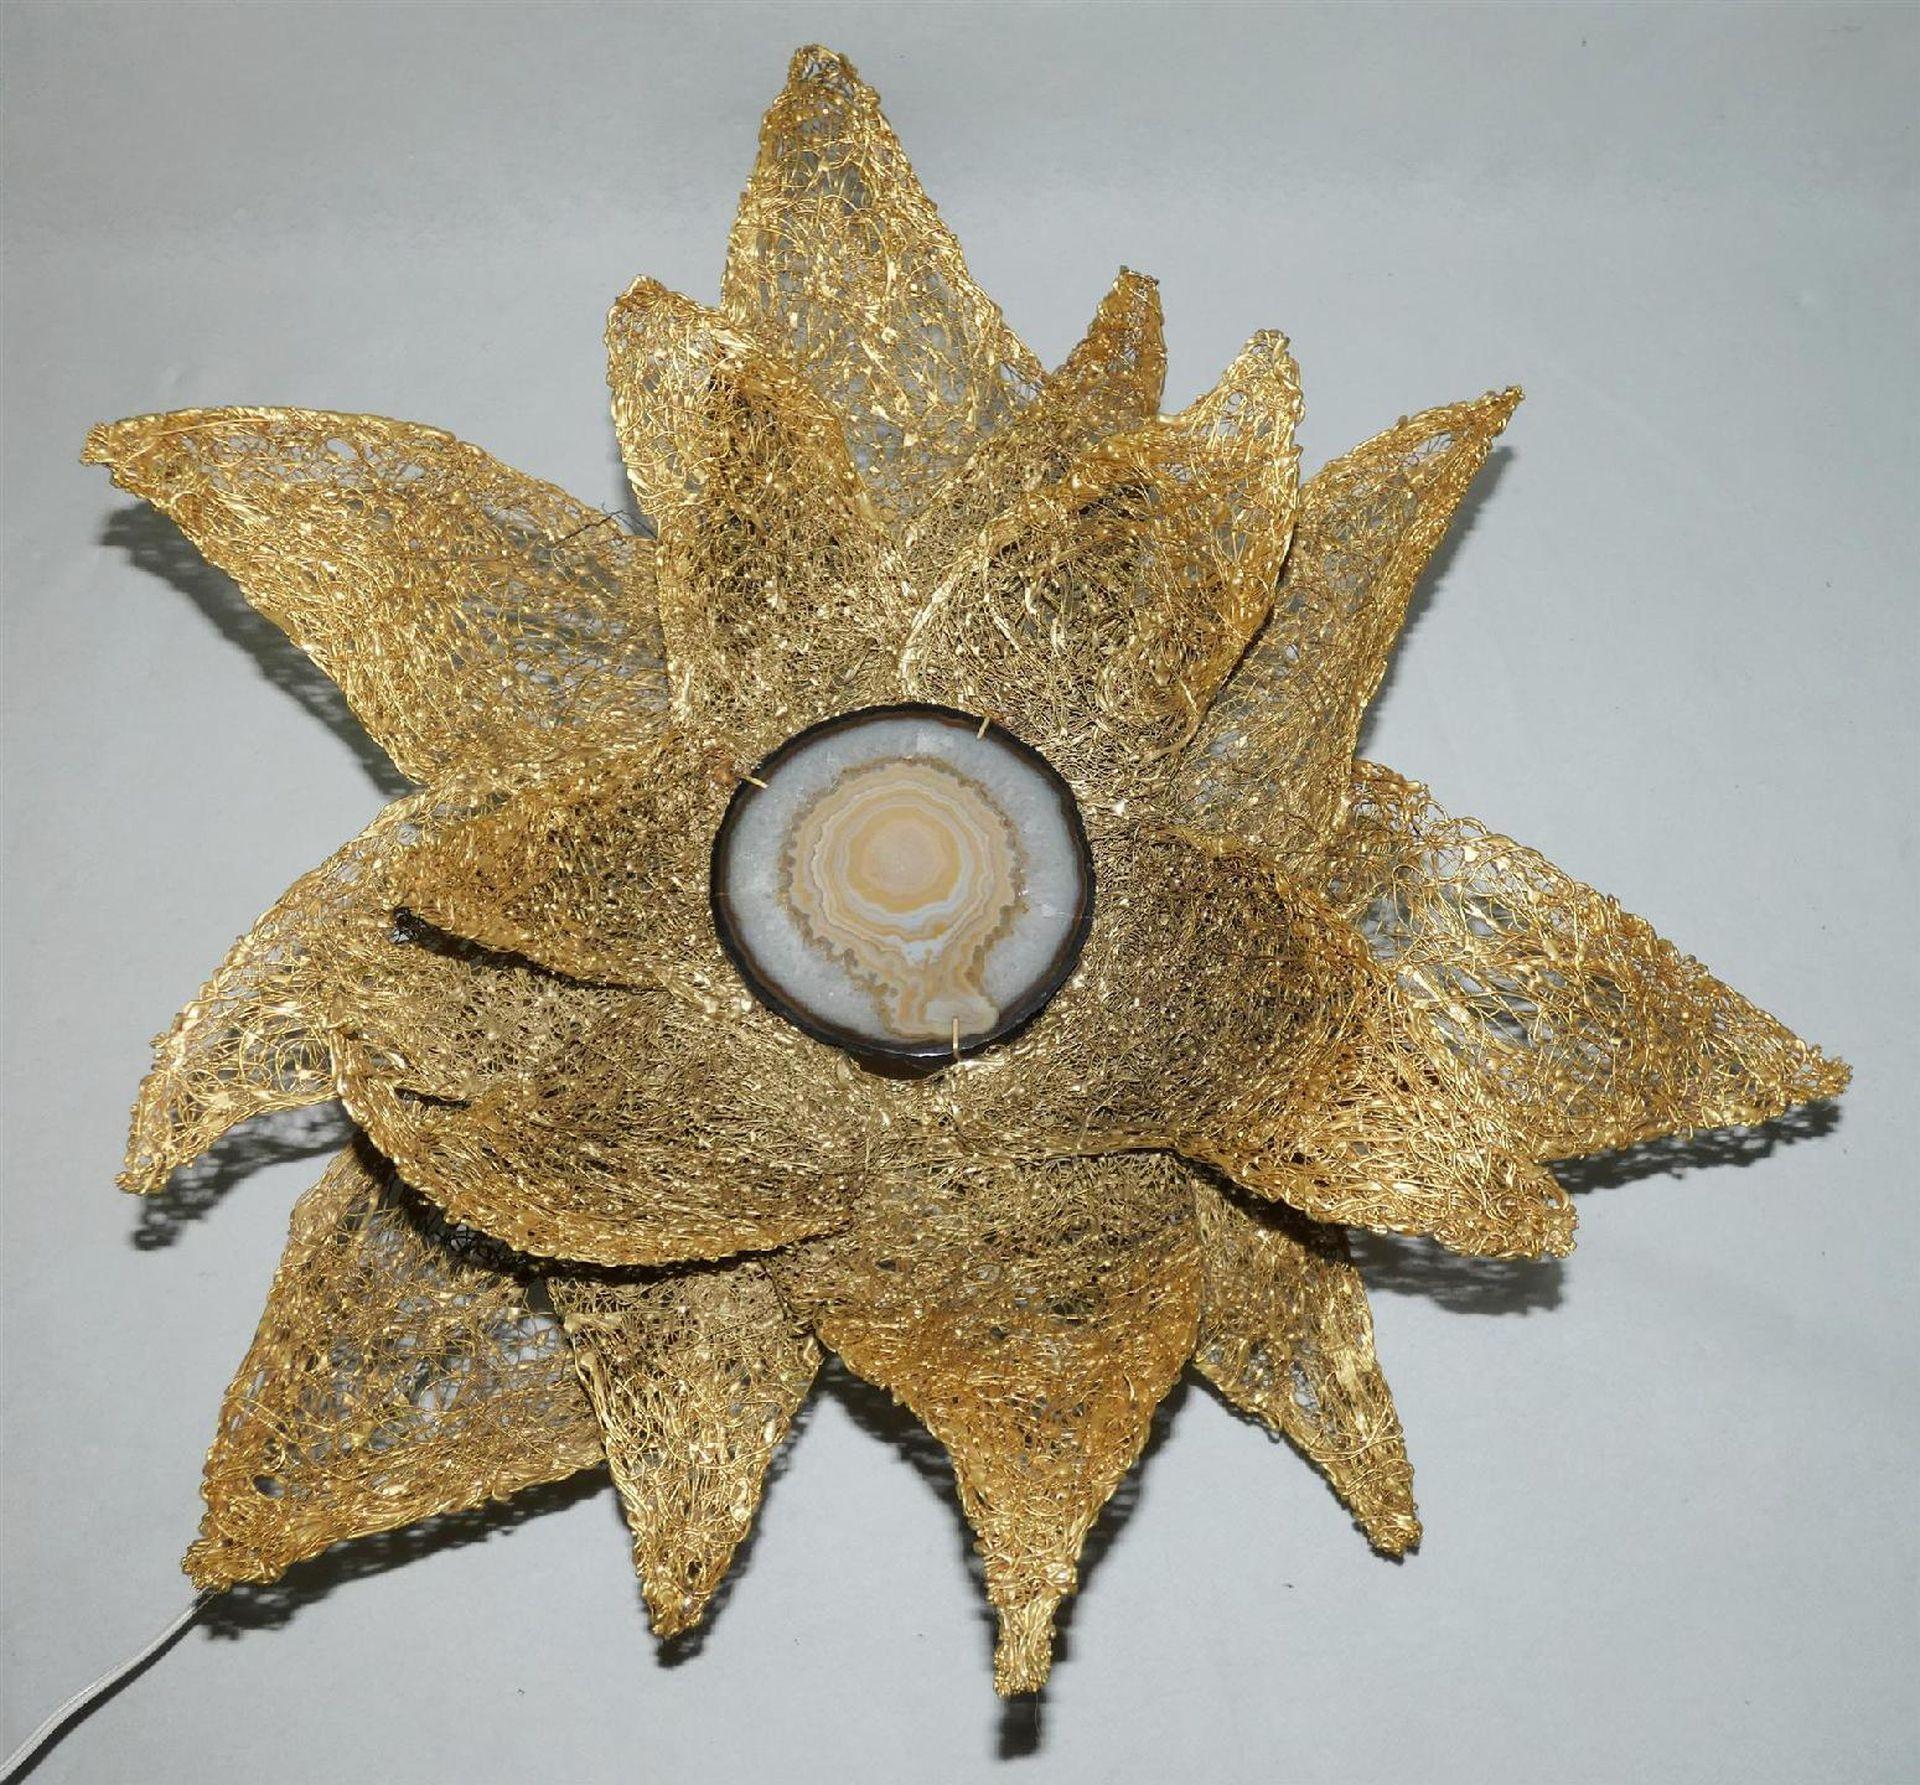 Flower sconce in gilded metal wire and agate heart. Measures: Diameter 57 cm.
Small slit in the agate.